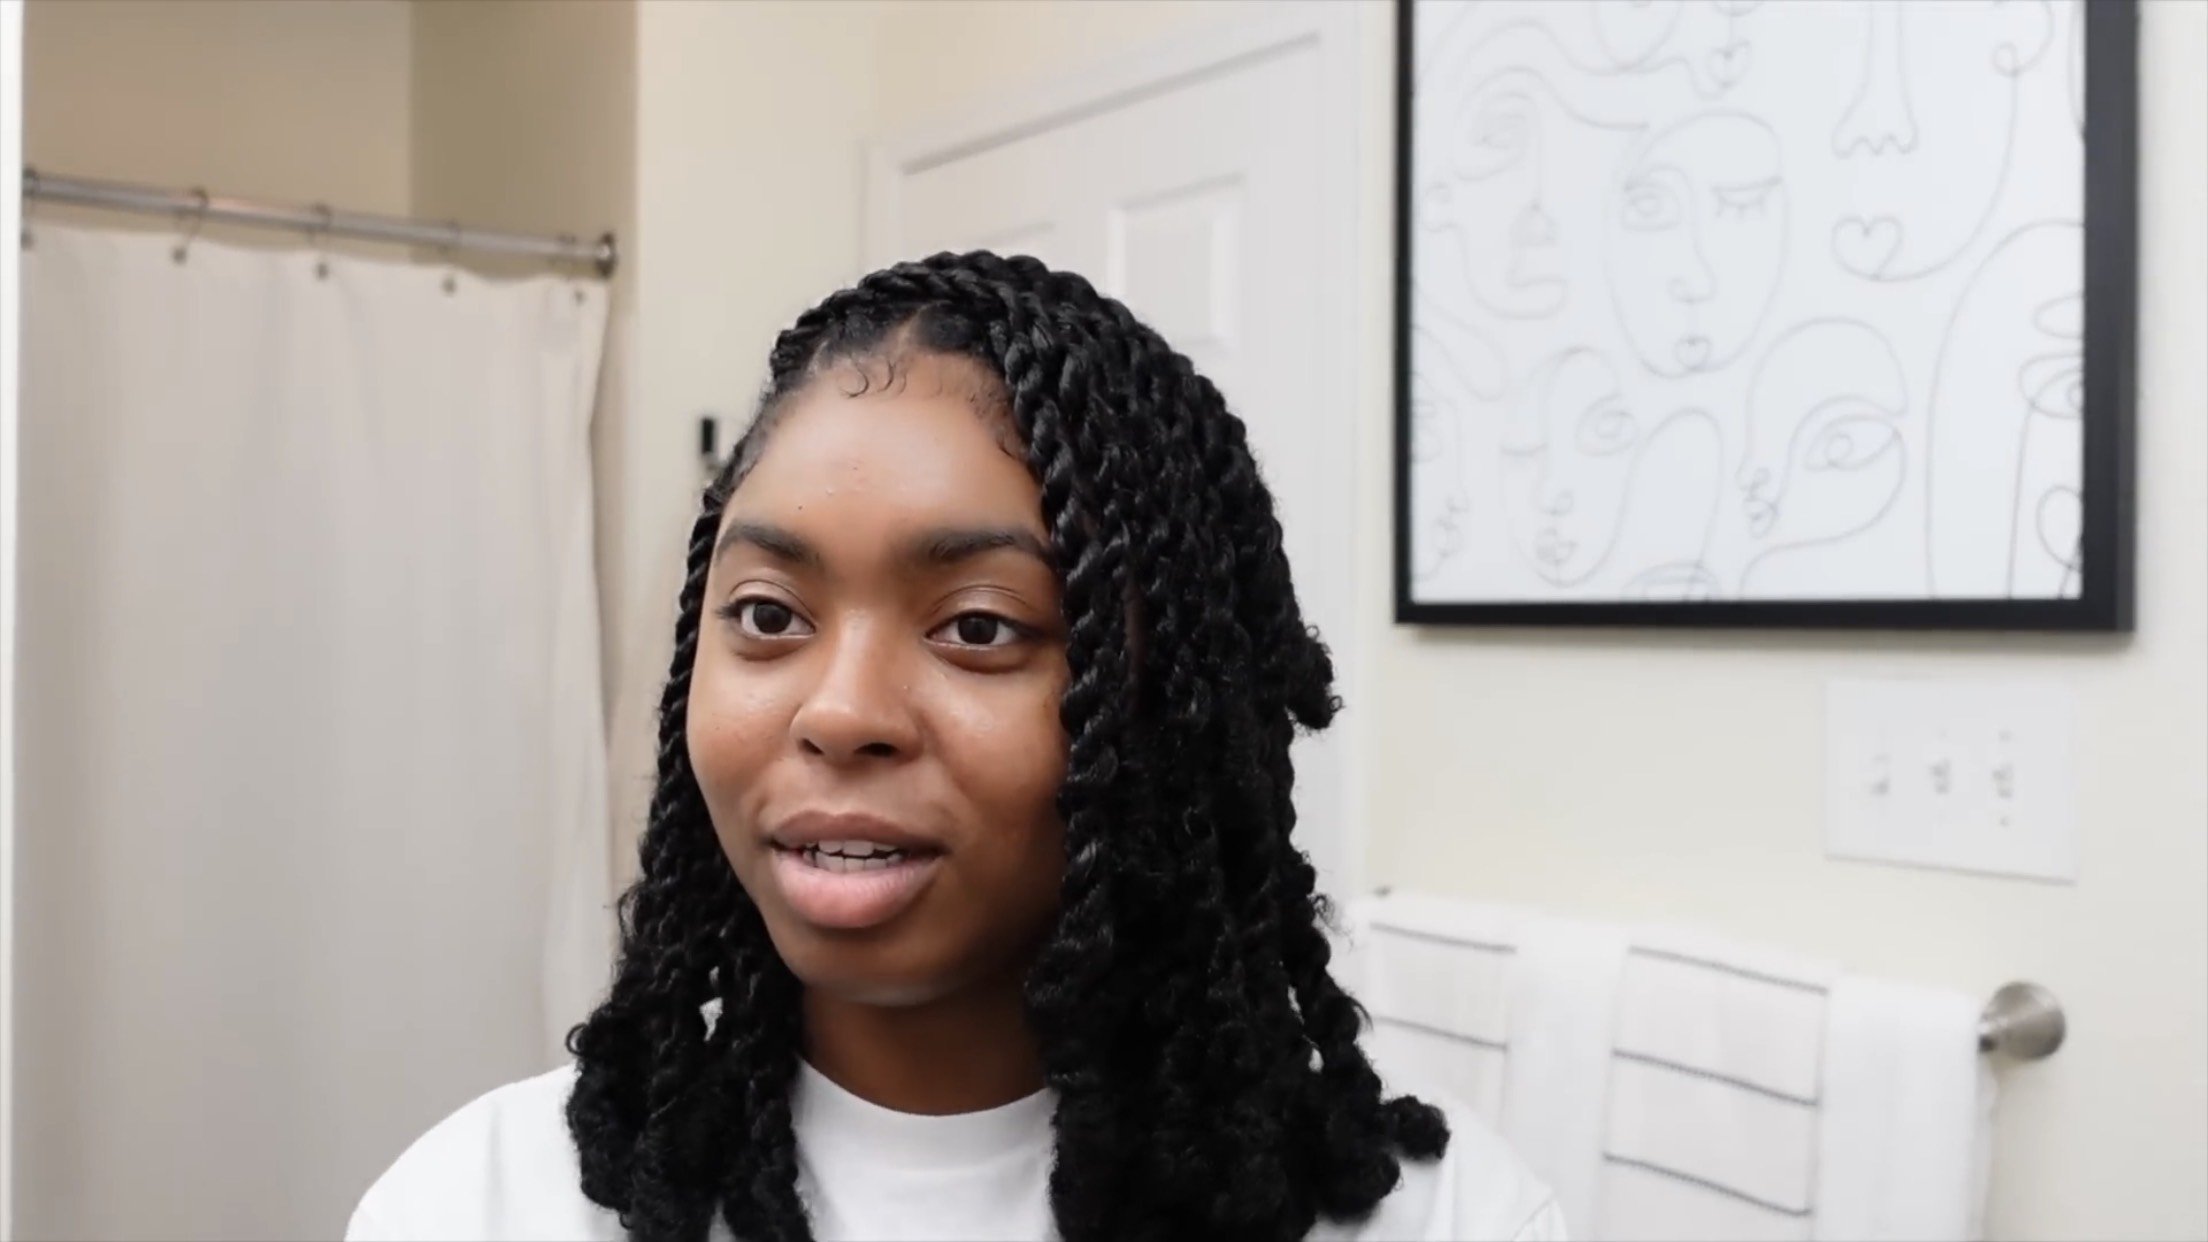 A woman with two-strand twists | Source: YouTube/ Jateraa Bria'Na